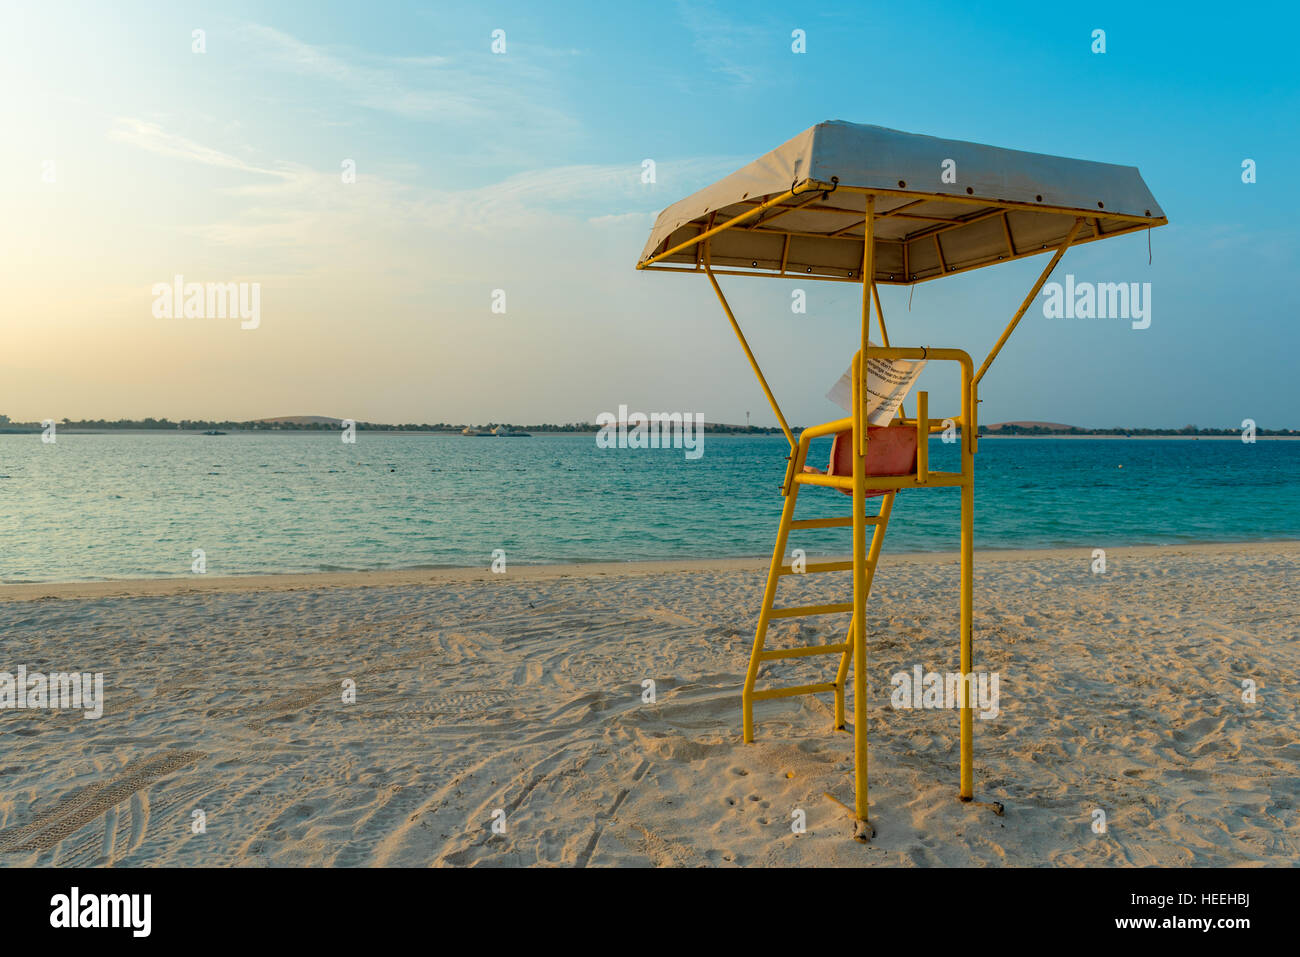 Life guard station on an Abu Dhabi beach in late afternoon Stock Photo